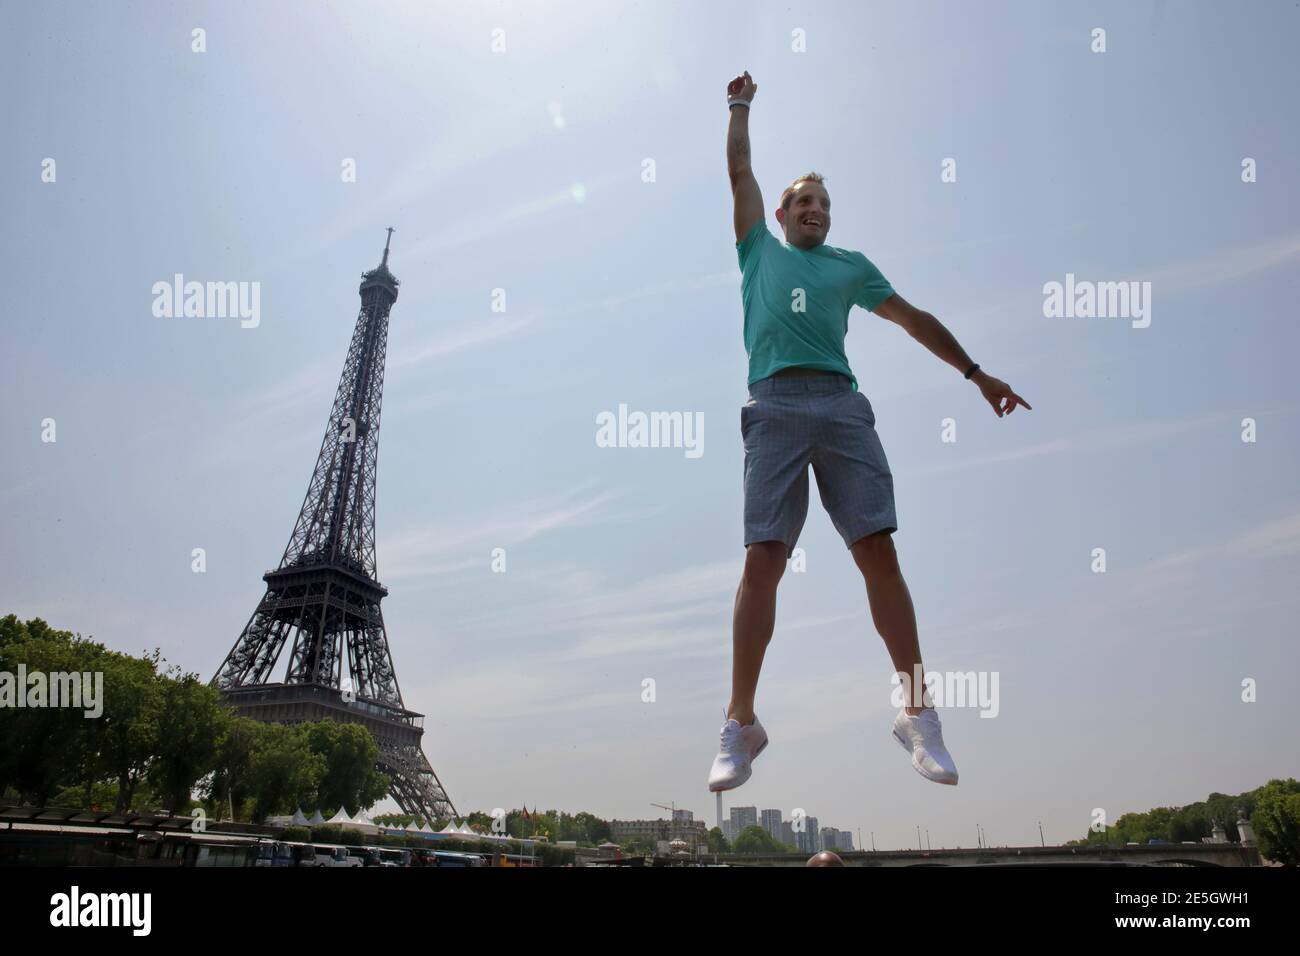 World-record pole vaulter Renaud Lavillenie of France jumps in front of the  Eiffel tower as he stands on the roof of a boat on the Seine River after a  news conference in